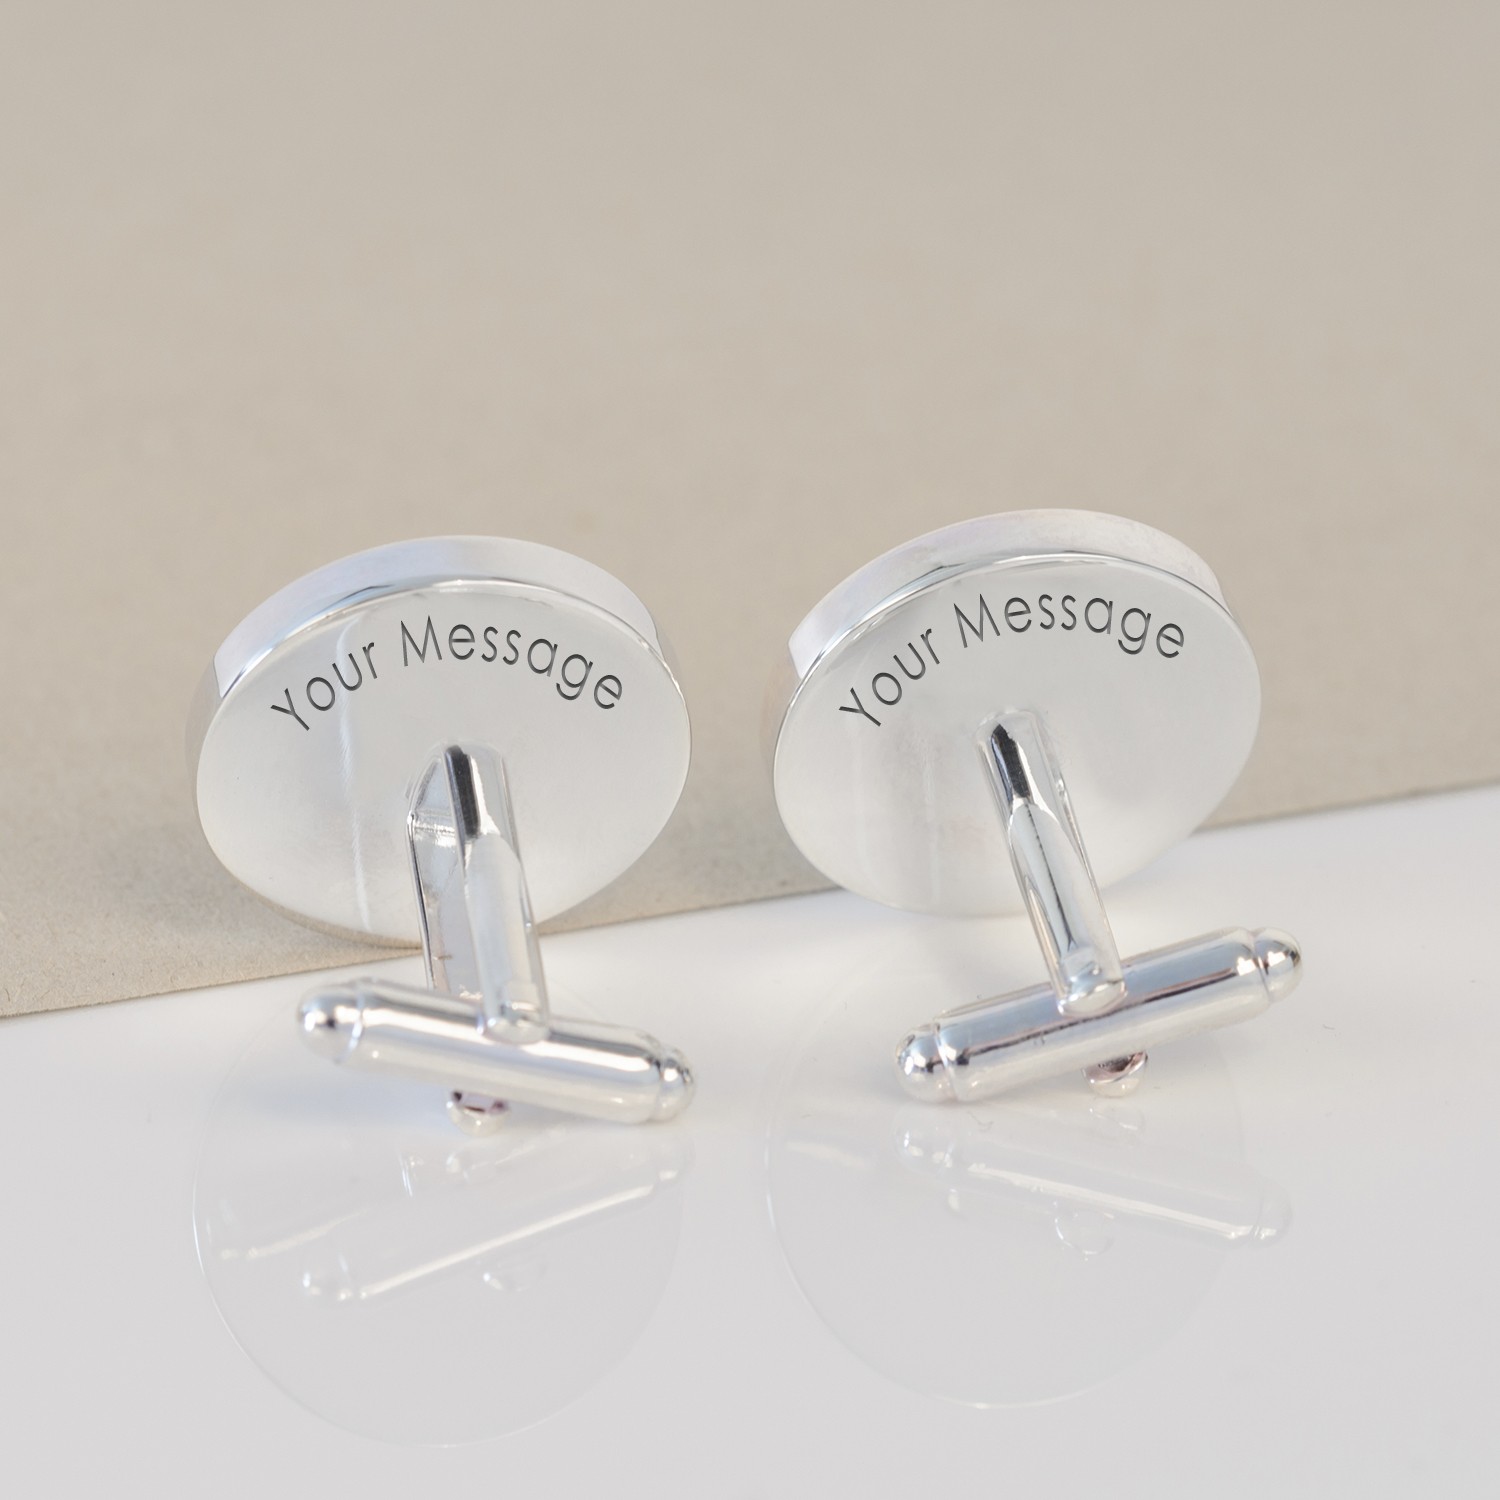 Select Gifts Ape Cufflinks Solid Sterling Silver 925 Personalised Engraved Message Box